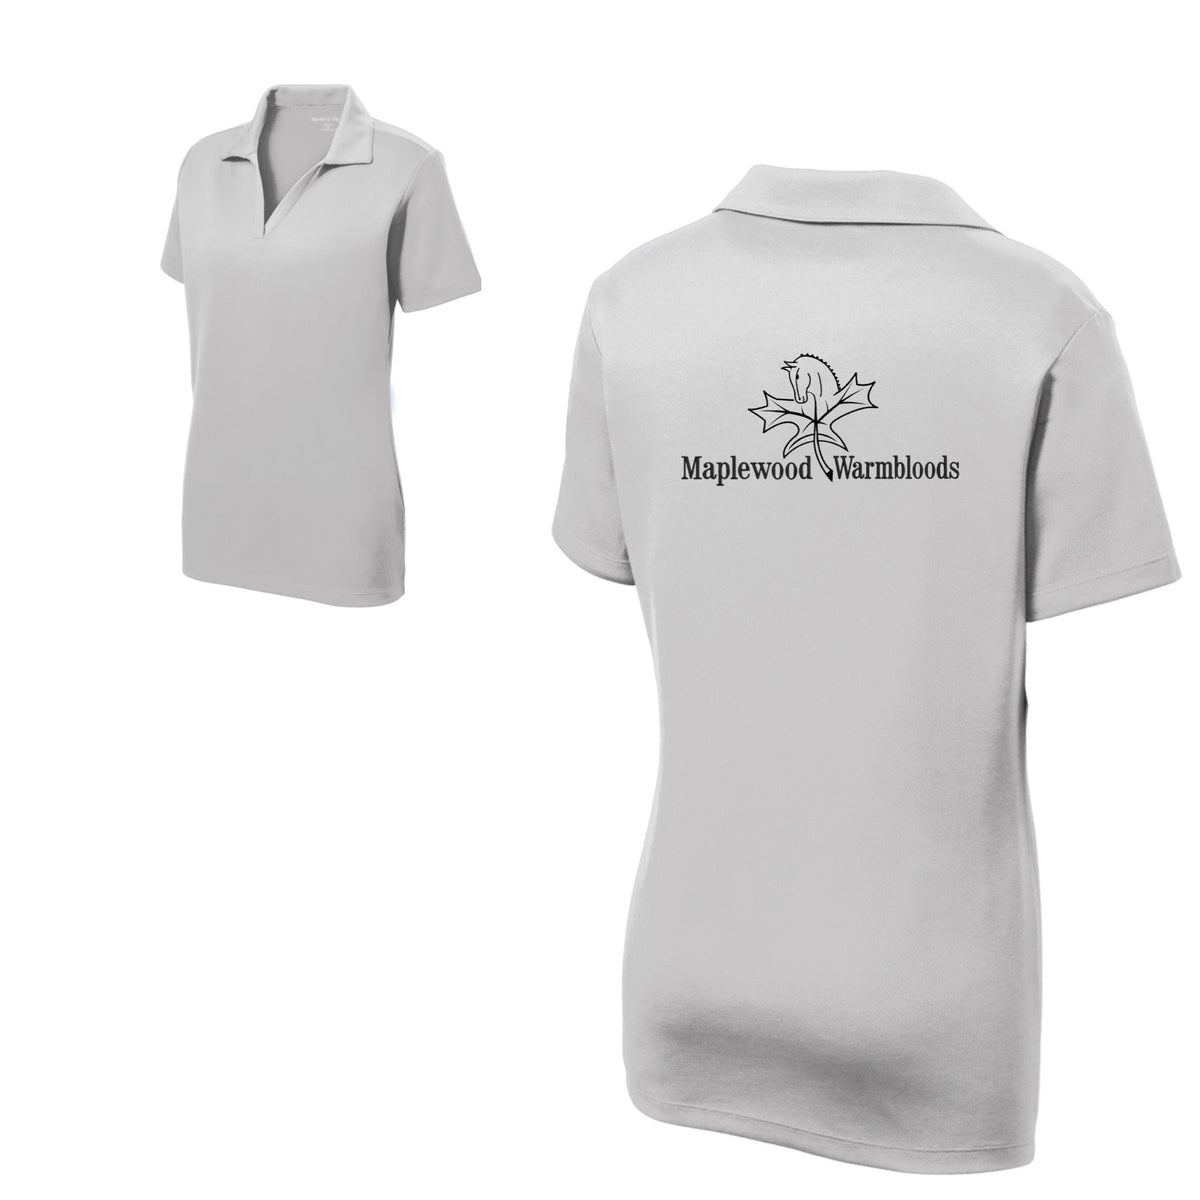 Equestrian Team Apparel Light Grey (Silver) / XS Maplewood Warmbloods- Men's Polos equestrian team apparel online tack store mobile tack store custom farm apparel custom show stable clothing equestrian lifestyle horse show clothing riding clothes horses equestrian tack store